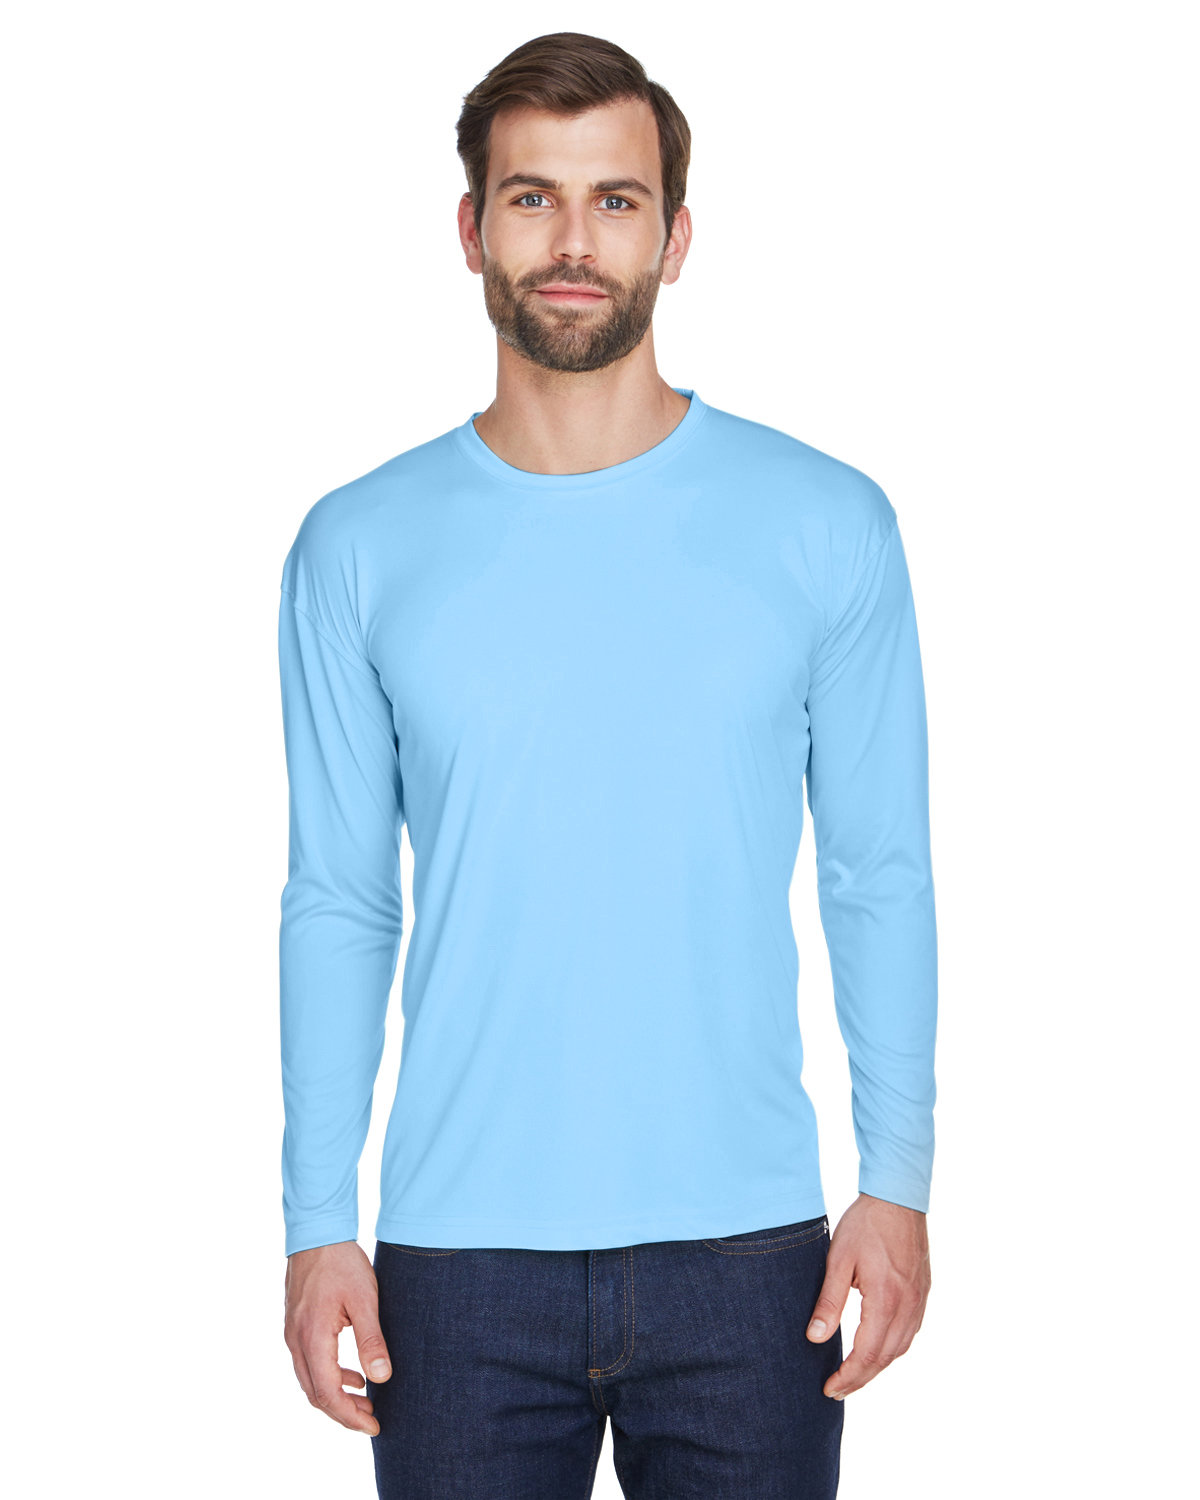 Source High quality 100% Polyester Long Sleeve Cheap Light Blue